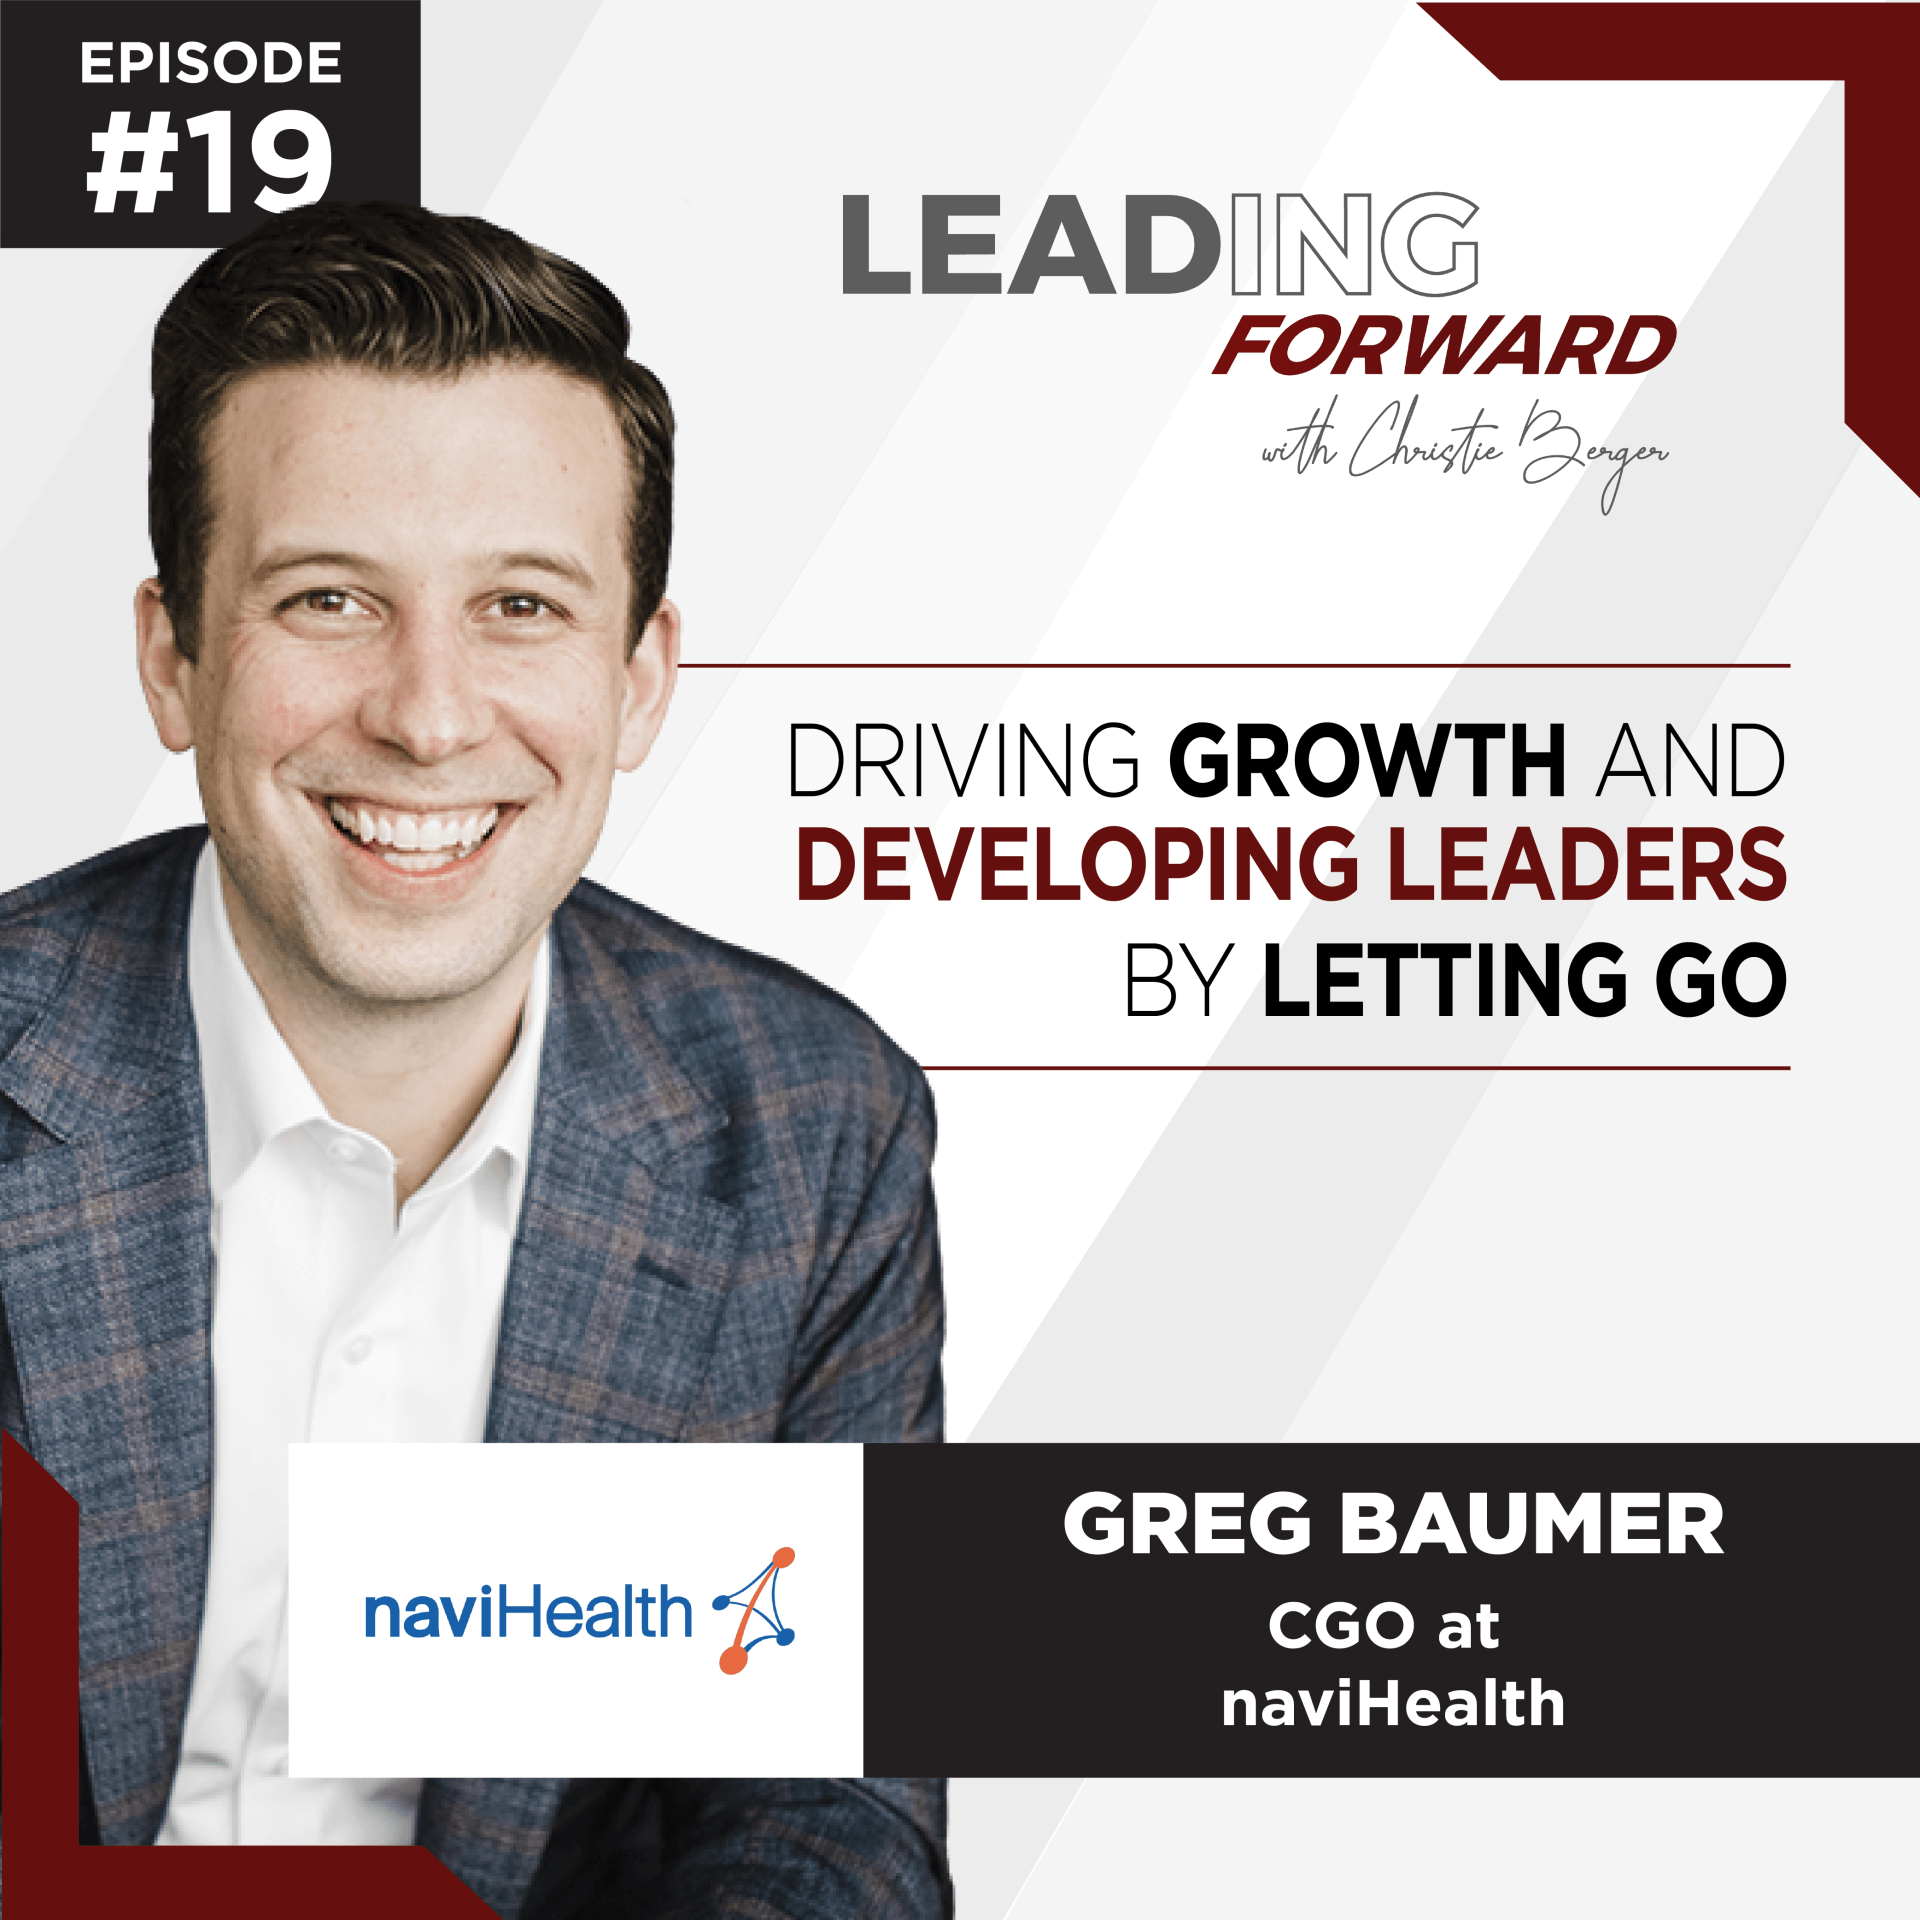 Leading Forward Podcast- Greg Baumer discusses their experience leading teams